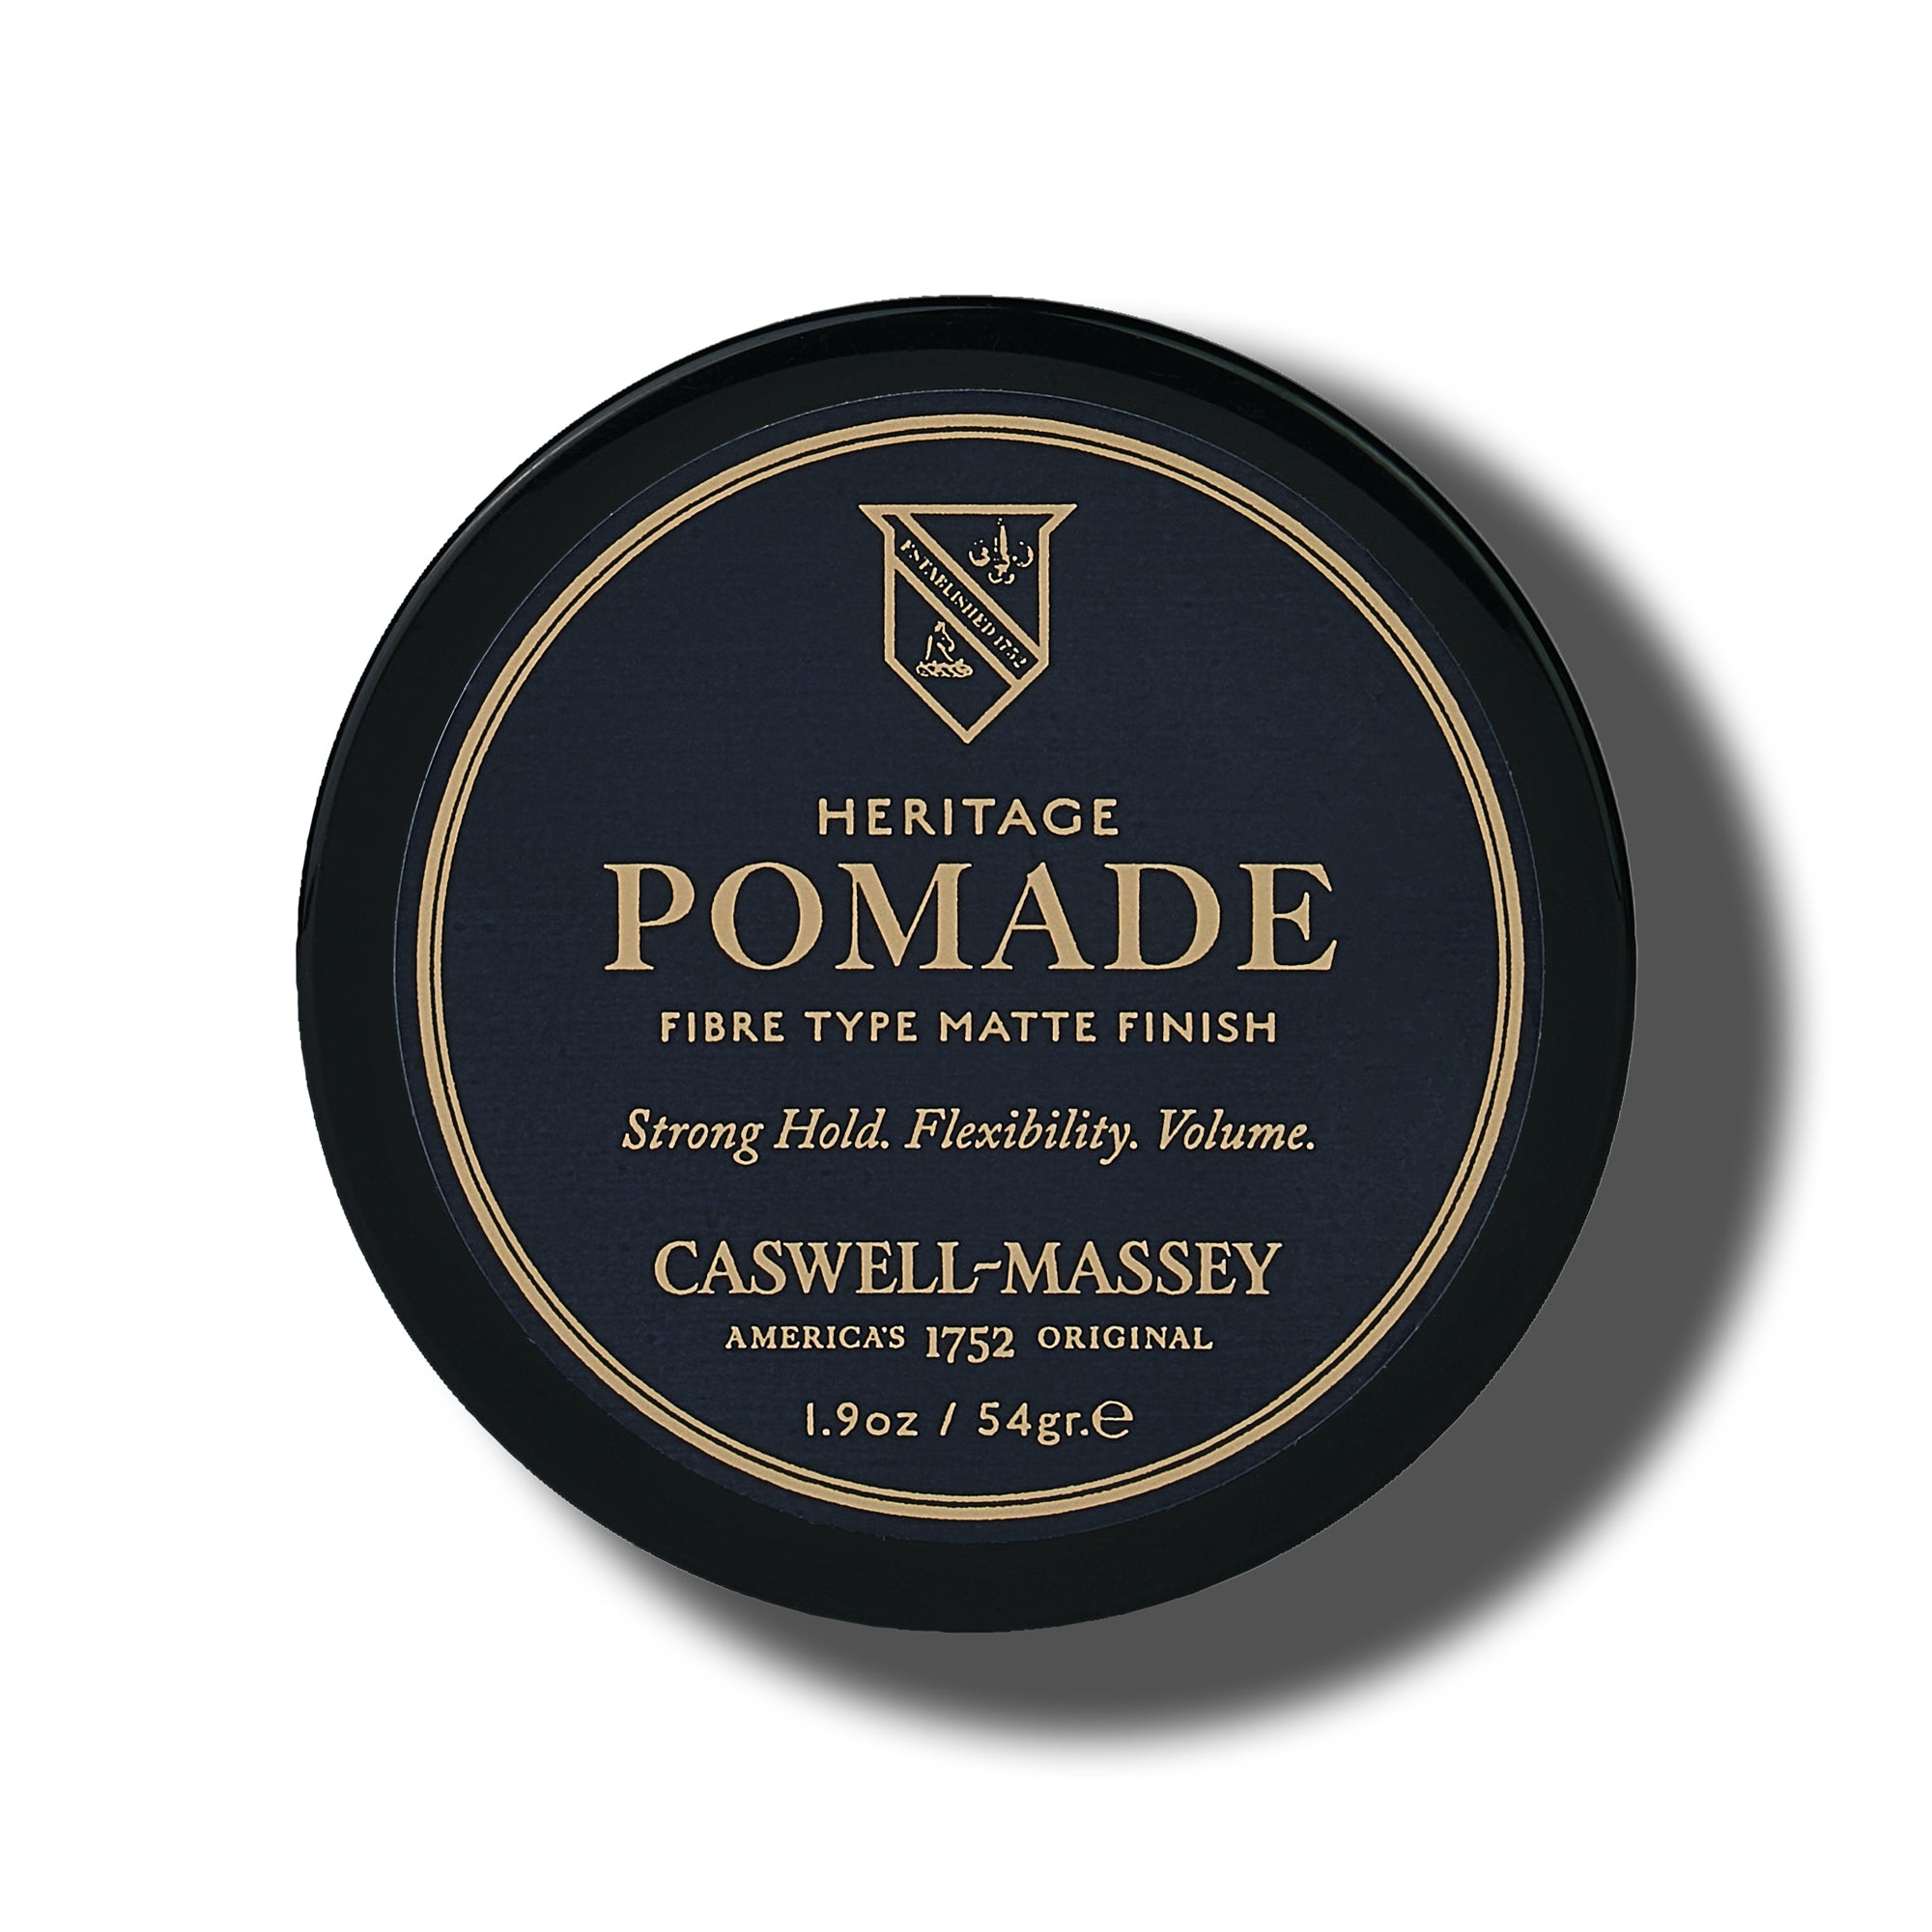 Caswell-Massey® Heritage Pomade - Matte Fibre